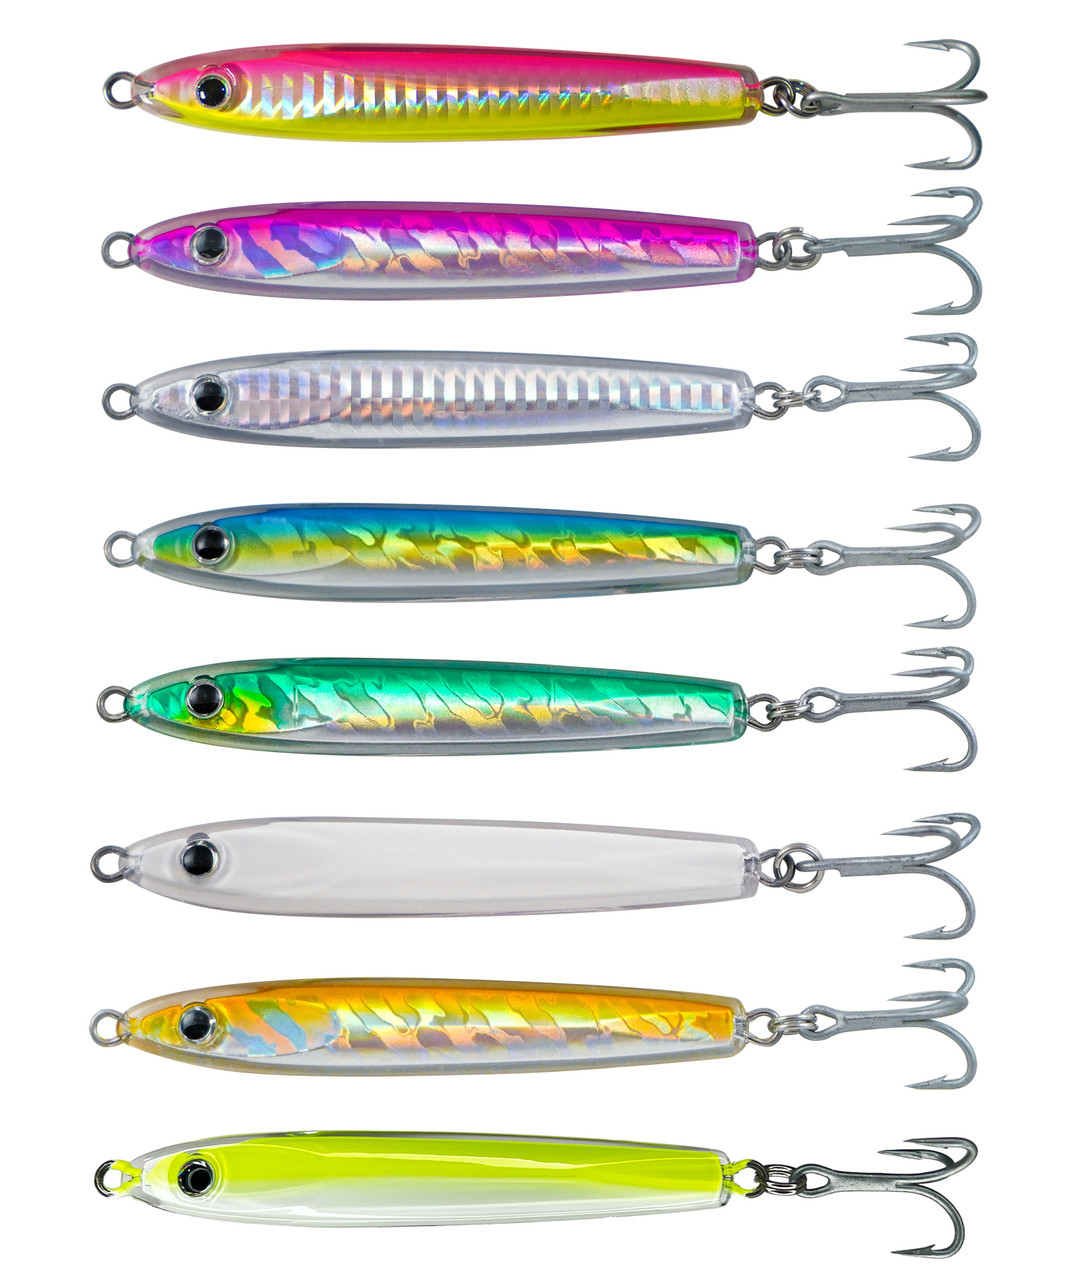 Spoon-Casting Striped Bass Saltwater Fishing Baits, Lures for sale